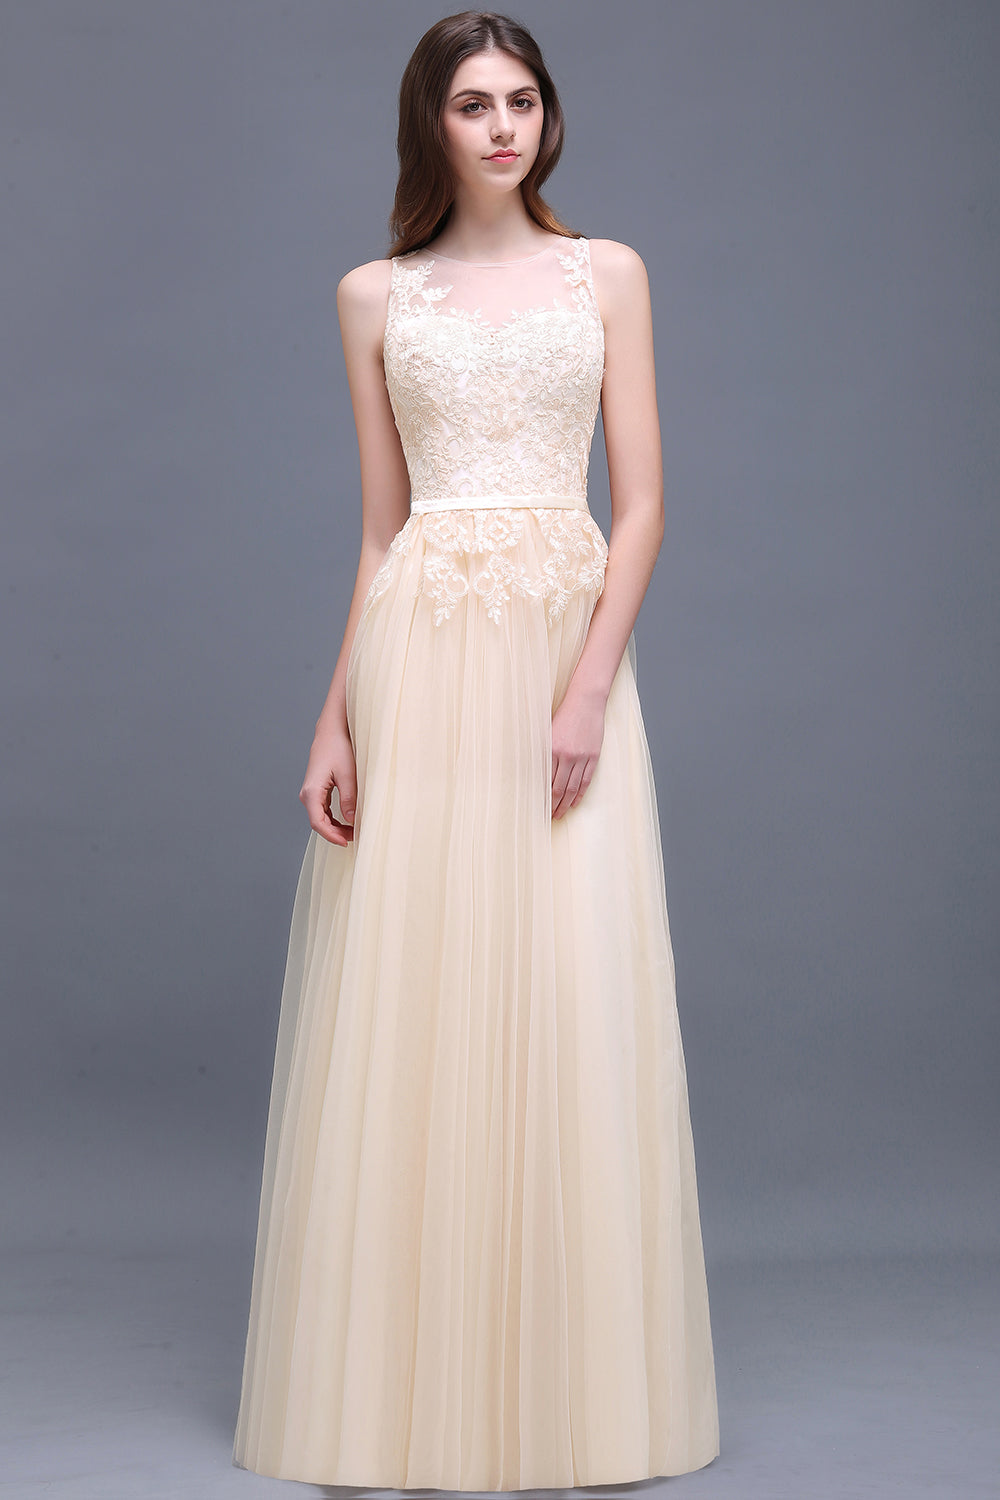 Elegant Tulle Lace Champagne Long Bridesmaid Dress With Appliques